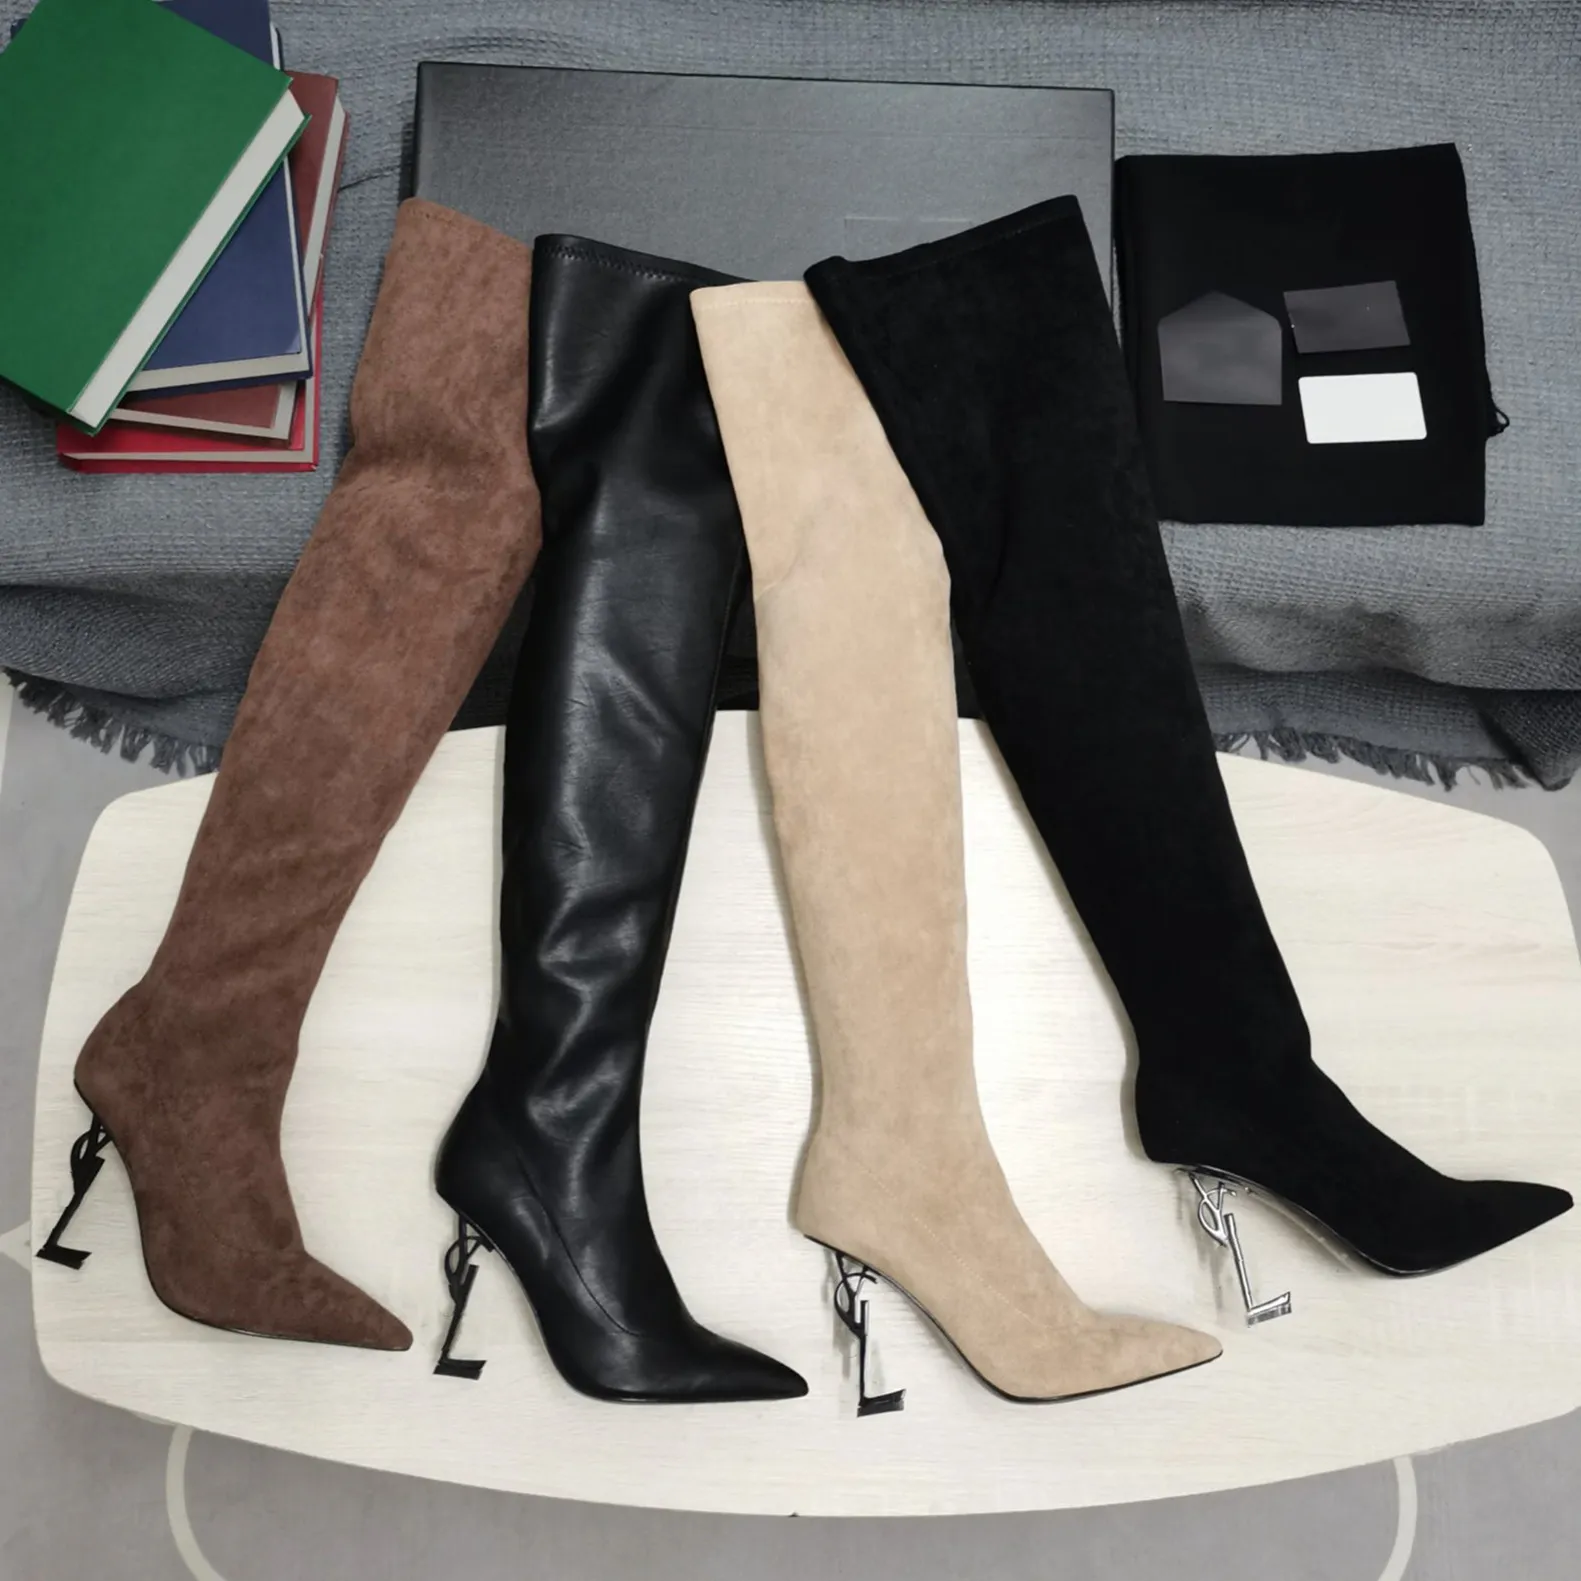 Designer Limited Edition Women Thigh-High Boots Luxury Fashion Temperament High Boot Top quality Leather Non Slip Roman Booties Pointed Toes Elegant Stiletto Heels